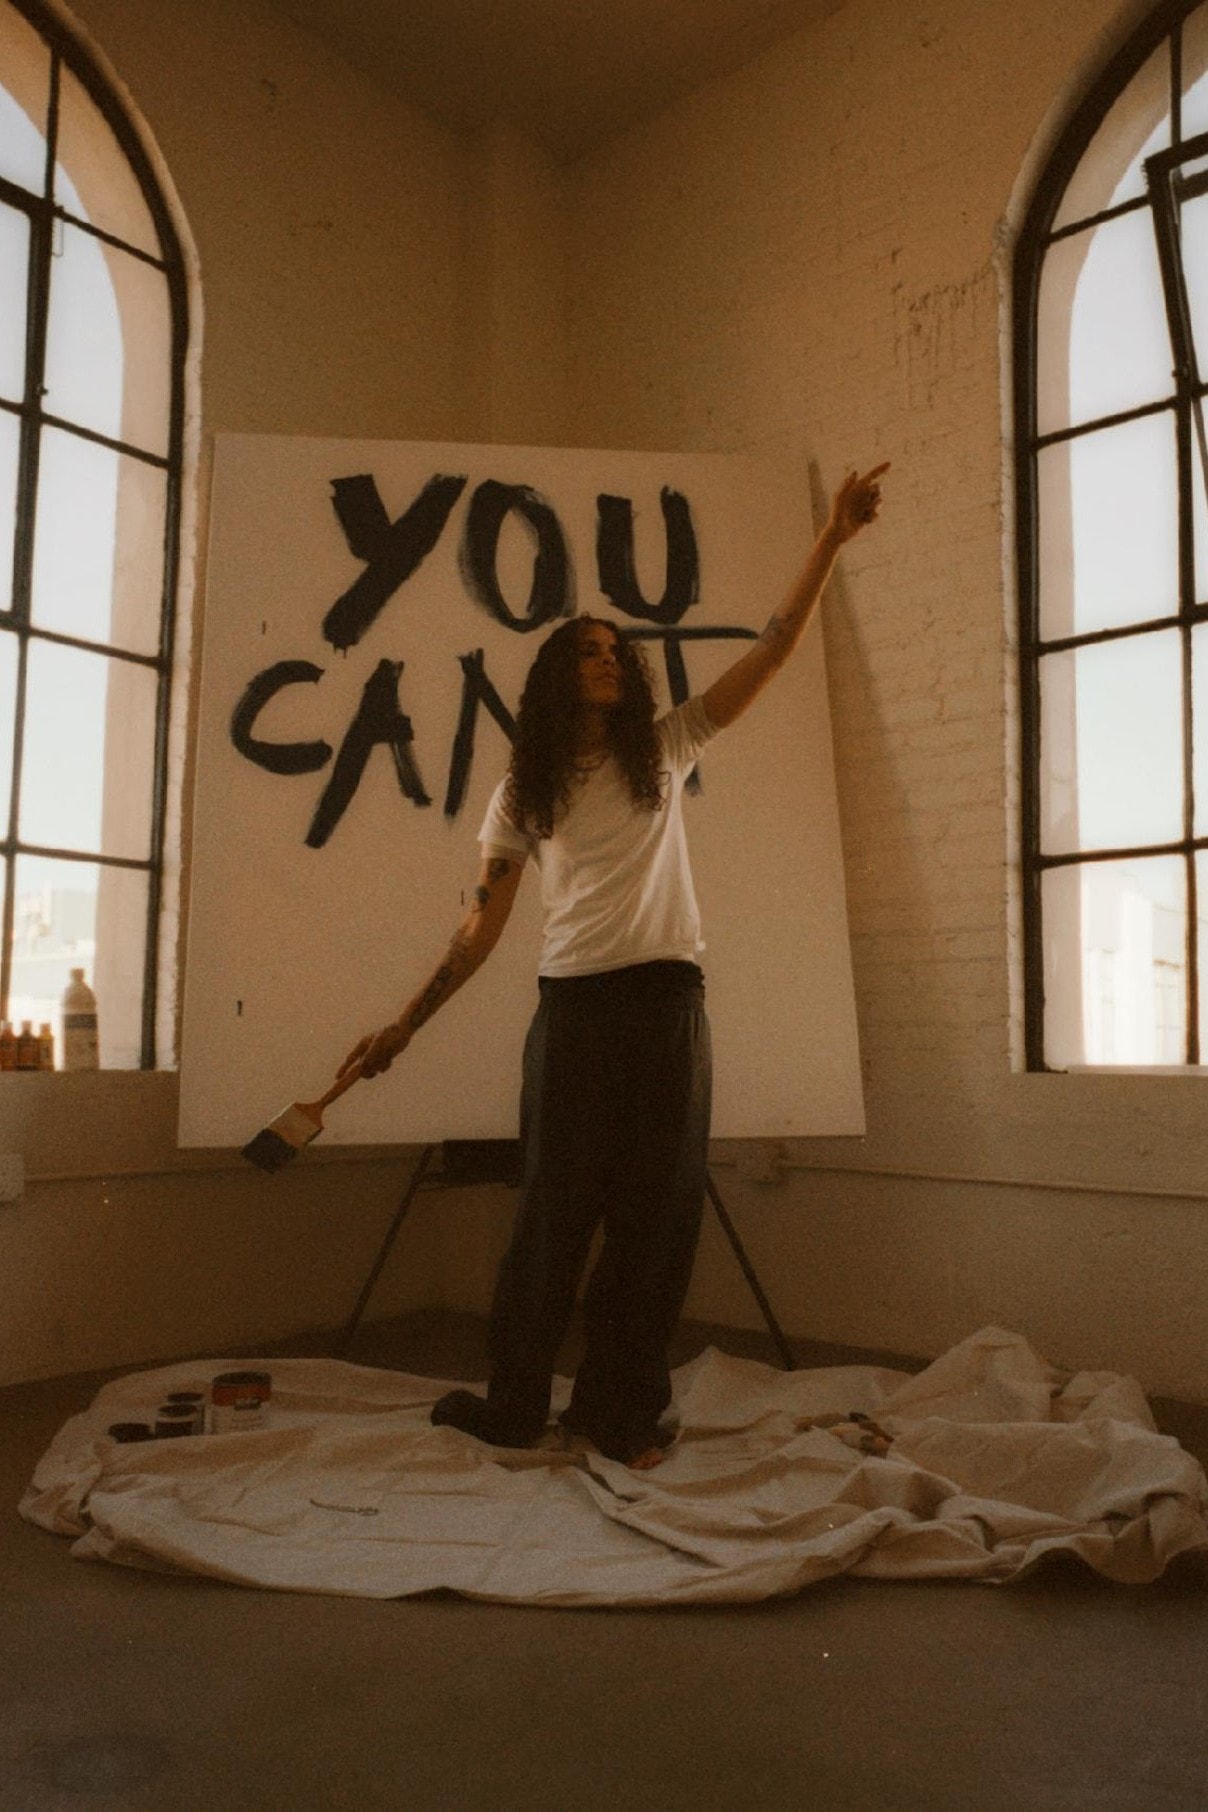 070 Shake Releases 'You Can't Kill Me' Album